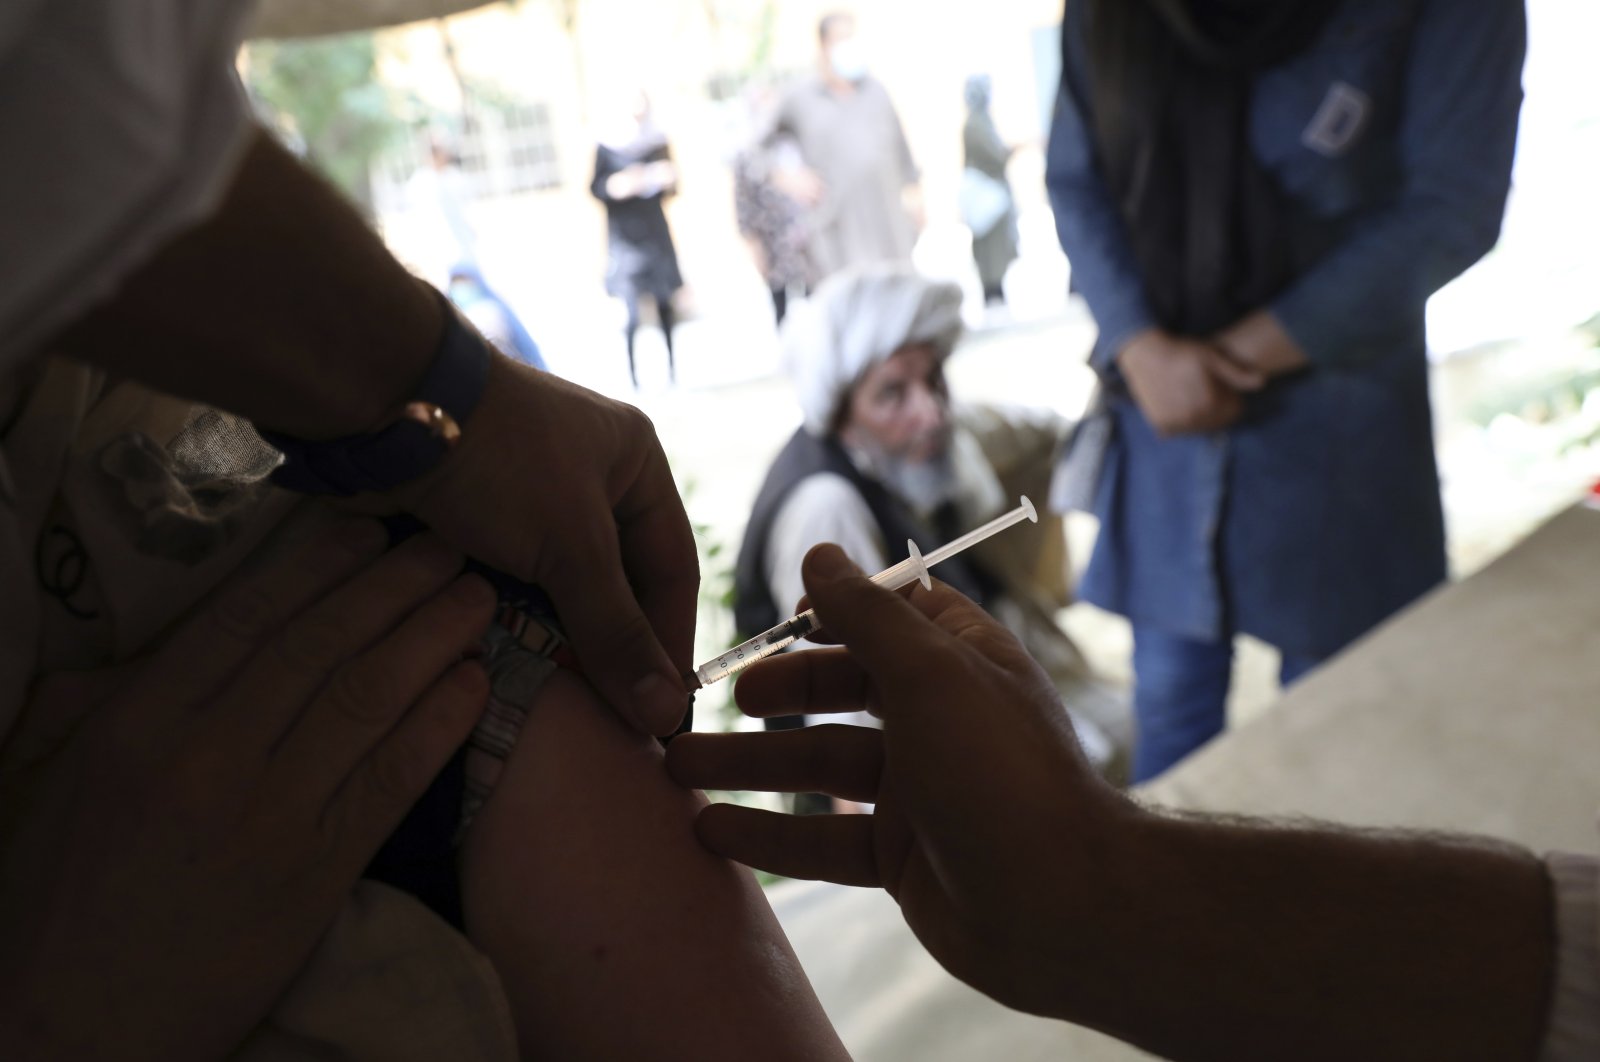 A woman receives the Johnson & Johnson COVID-19 vaccine at a vaccination center with COVID-19 vaccines delivered through the U.N.-backed COVAX program, in Kabul, Afghanistan, July 11, 2021. (AP Photo)